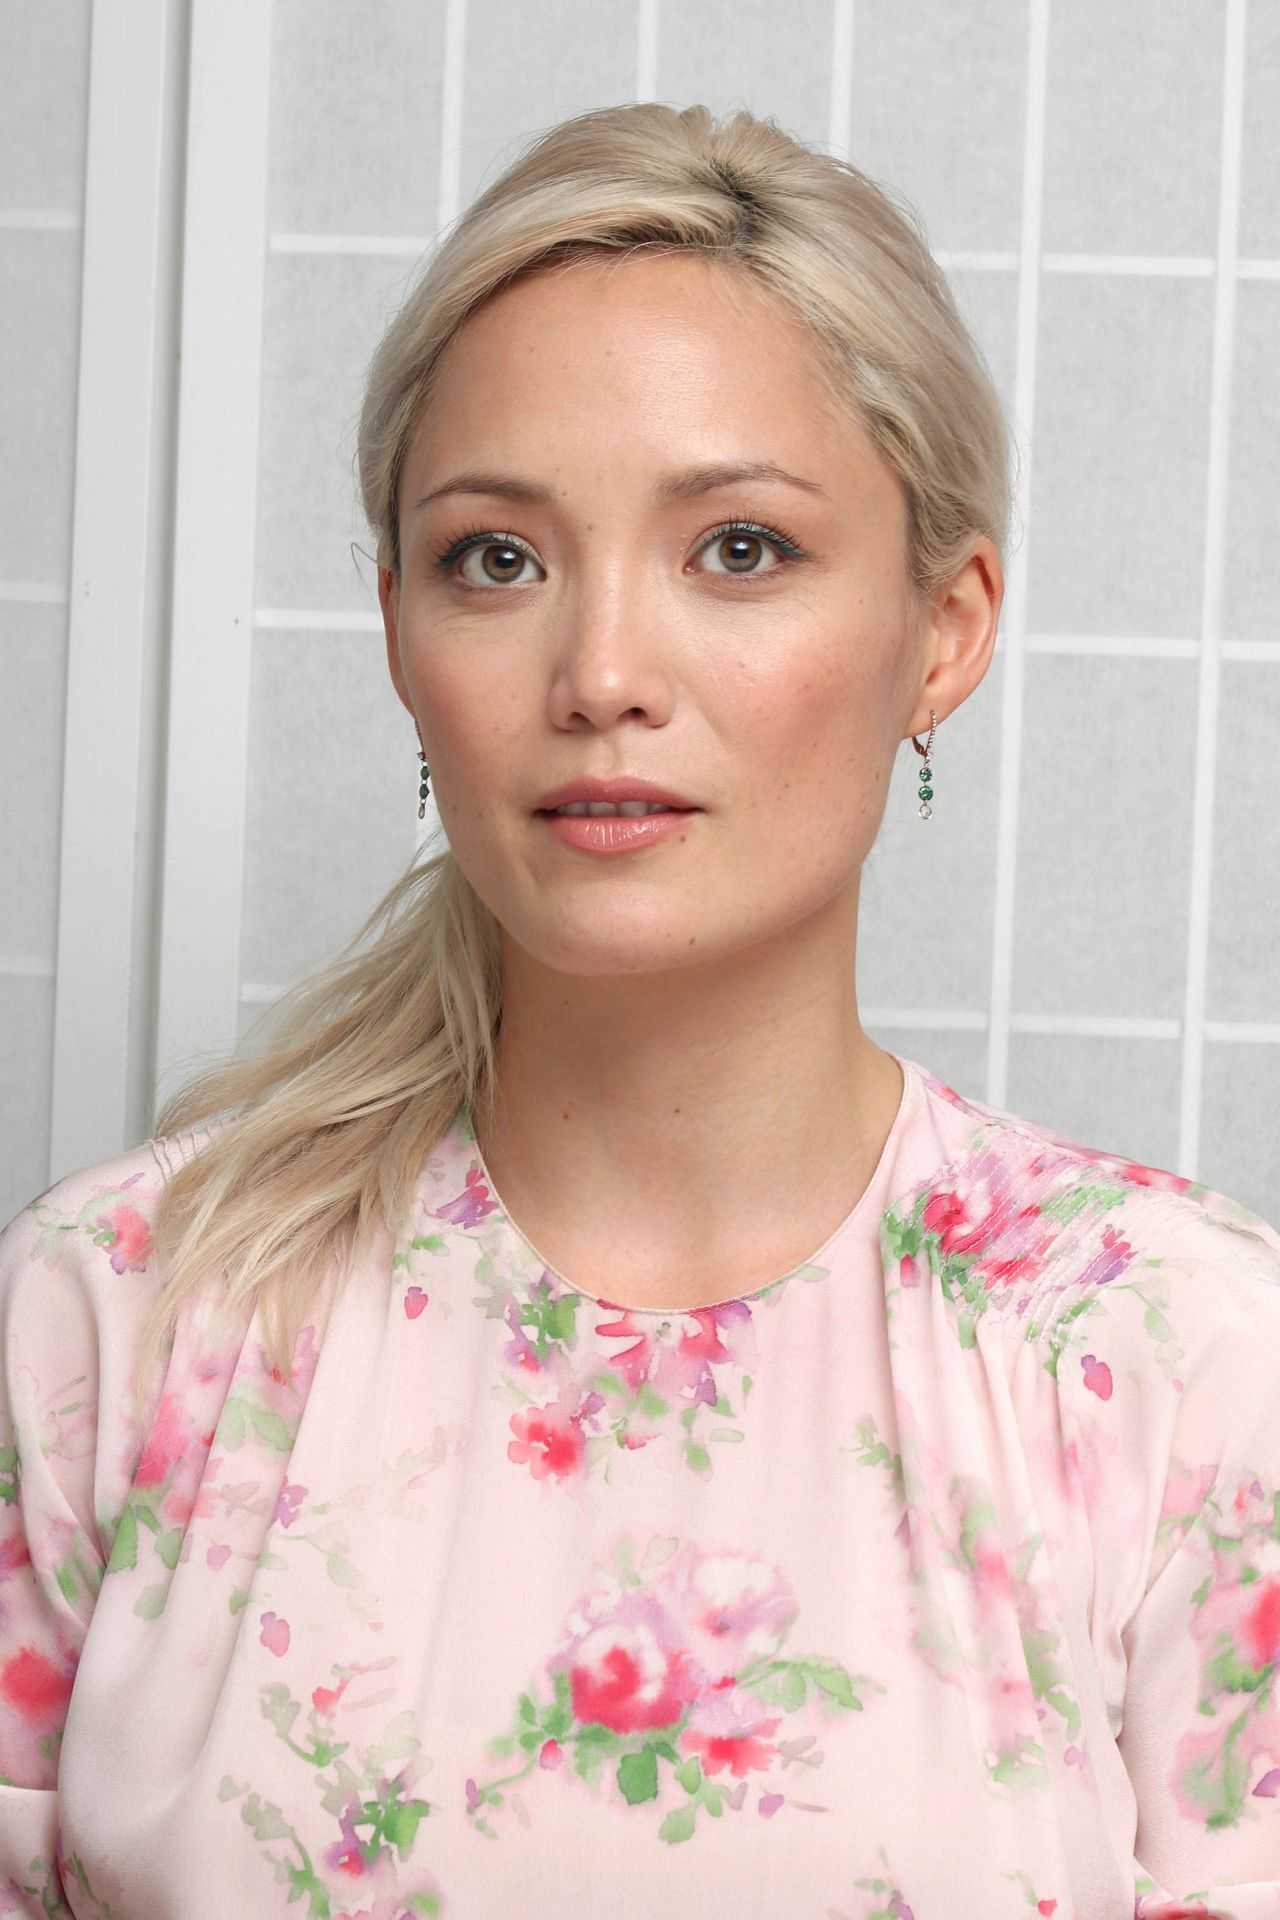 70+ Hot Pictures Of Pom Klementieff Who Plays Mantis In Marvel Cinematic Universe 24